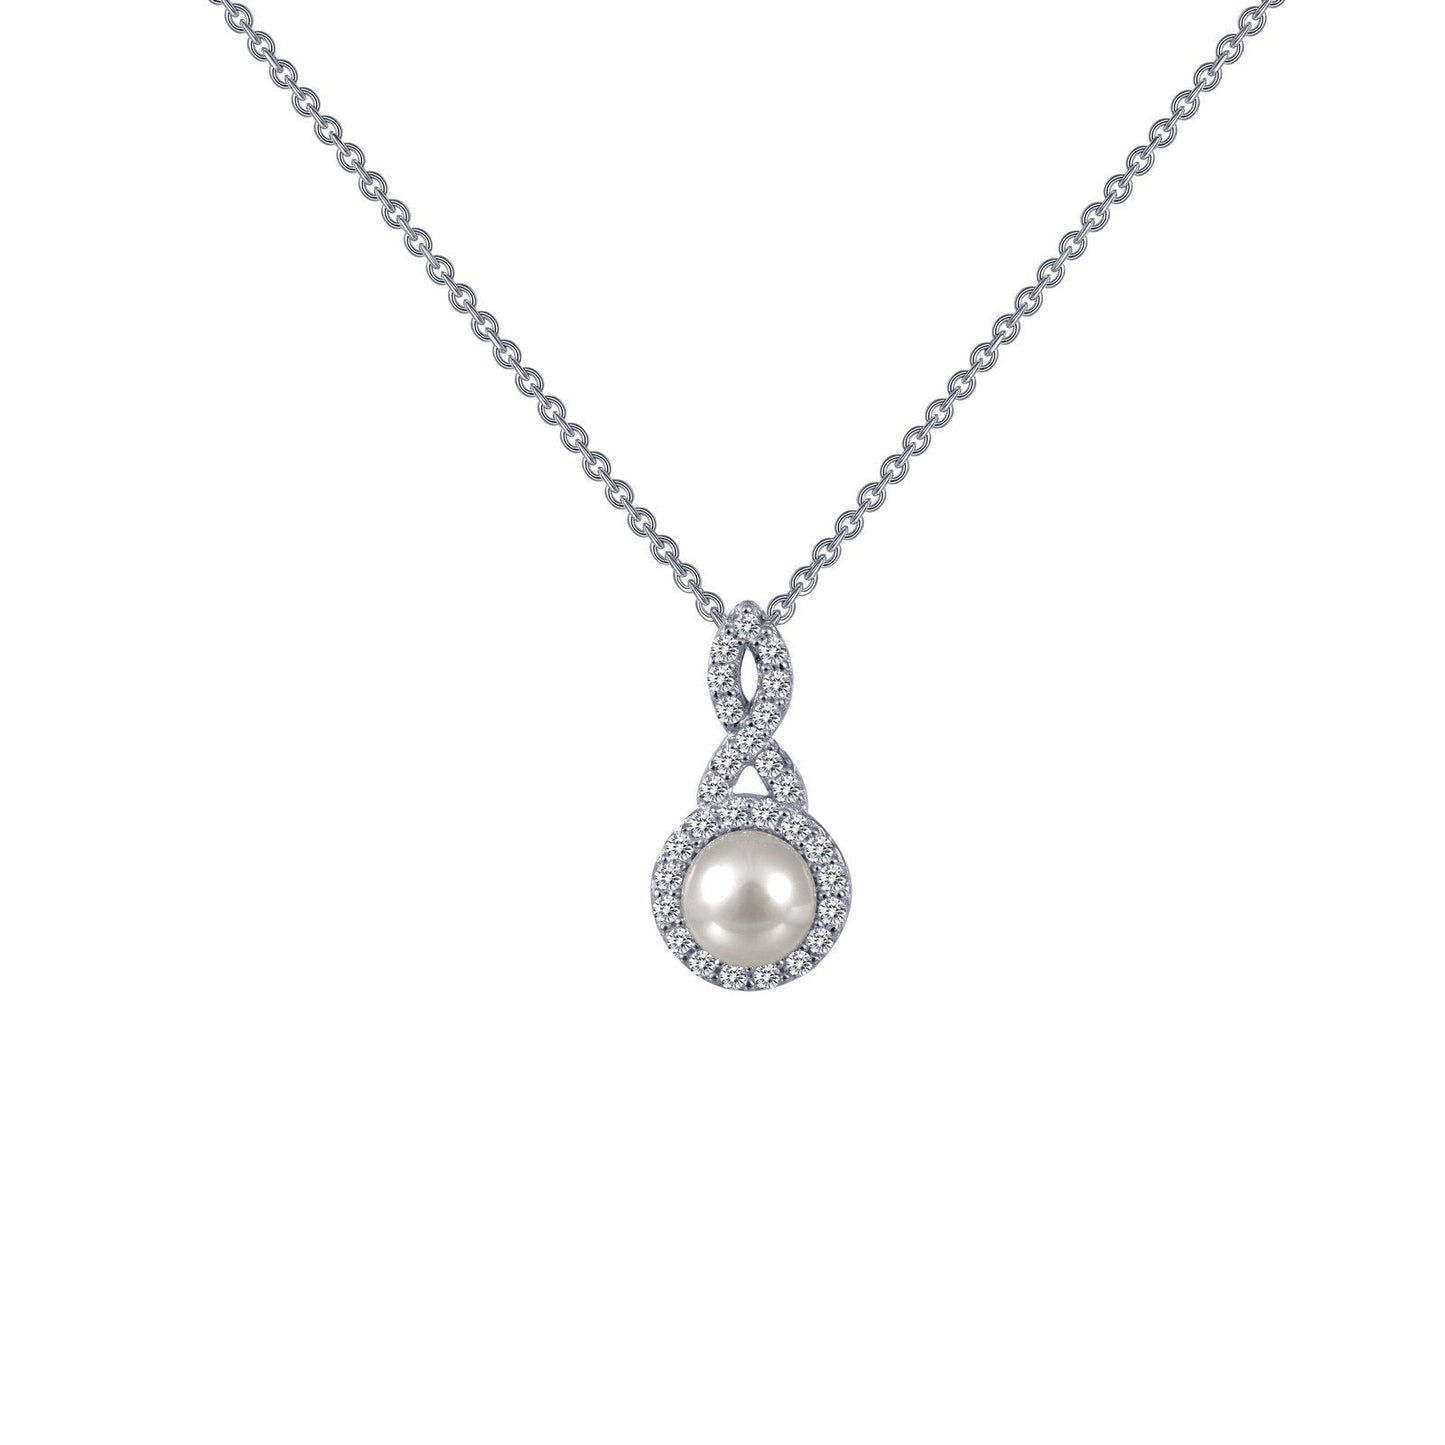 LaFonn Platinum Simulated Diamond N/A NECKLACES Cultured Freshwater Pearl Necklace